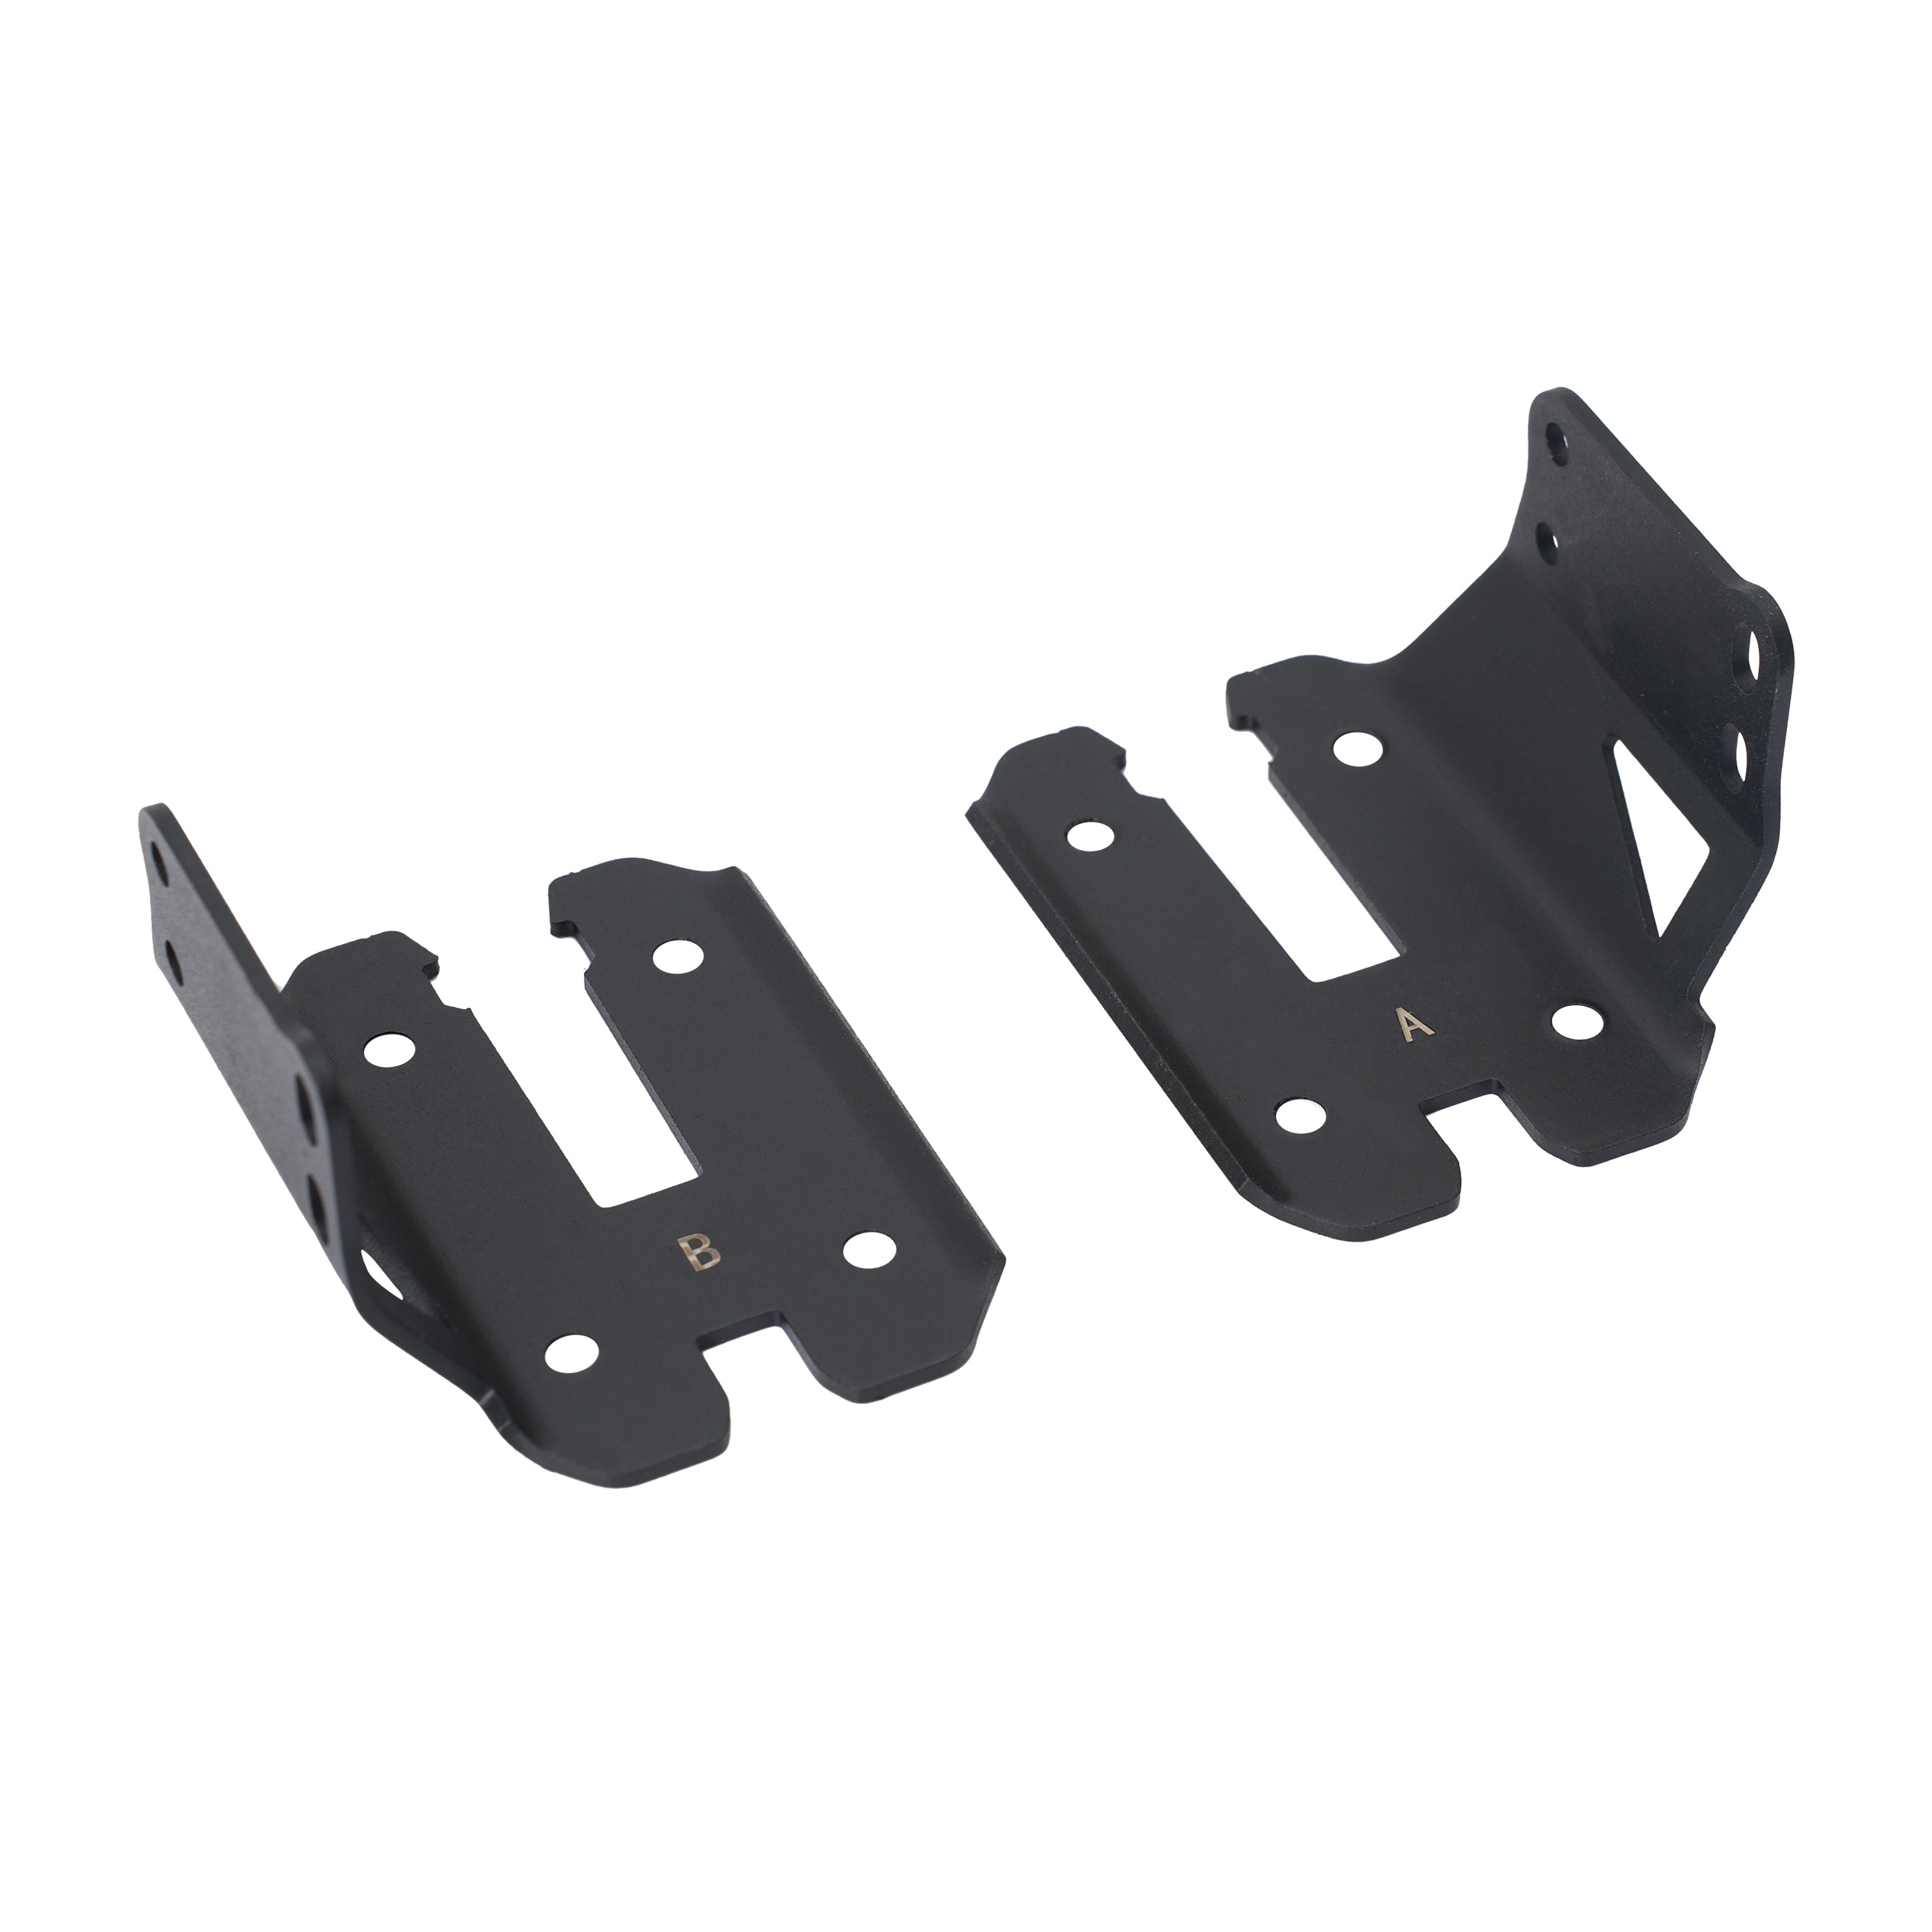 Off-Road Mud Guards for Atlas series